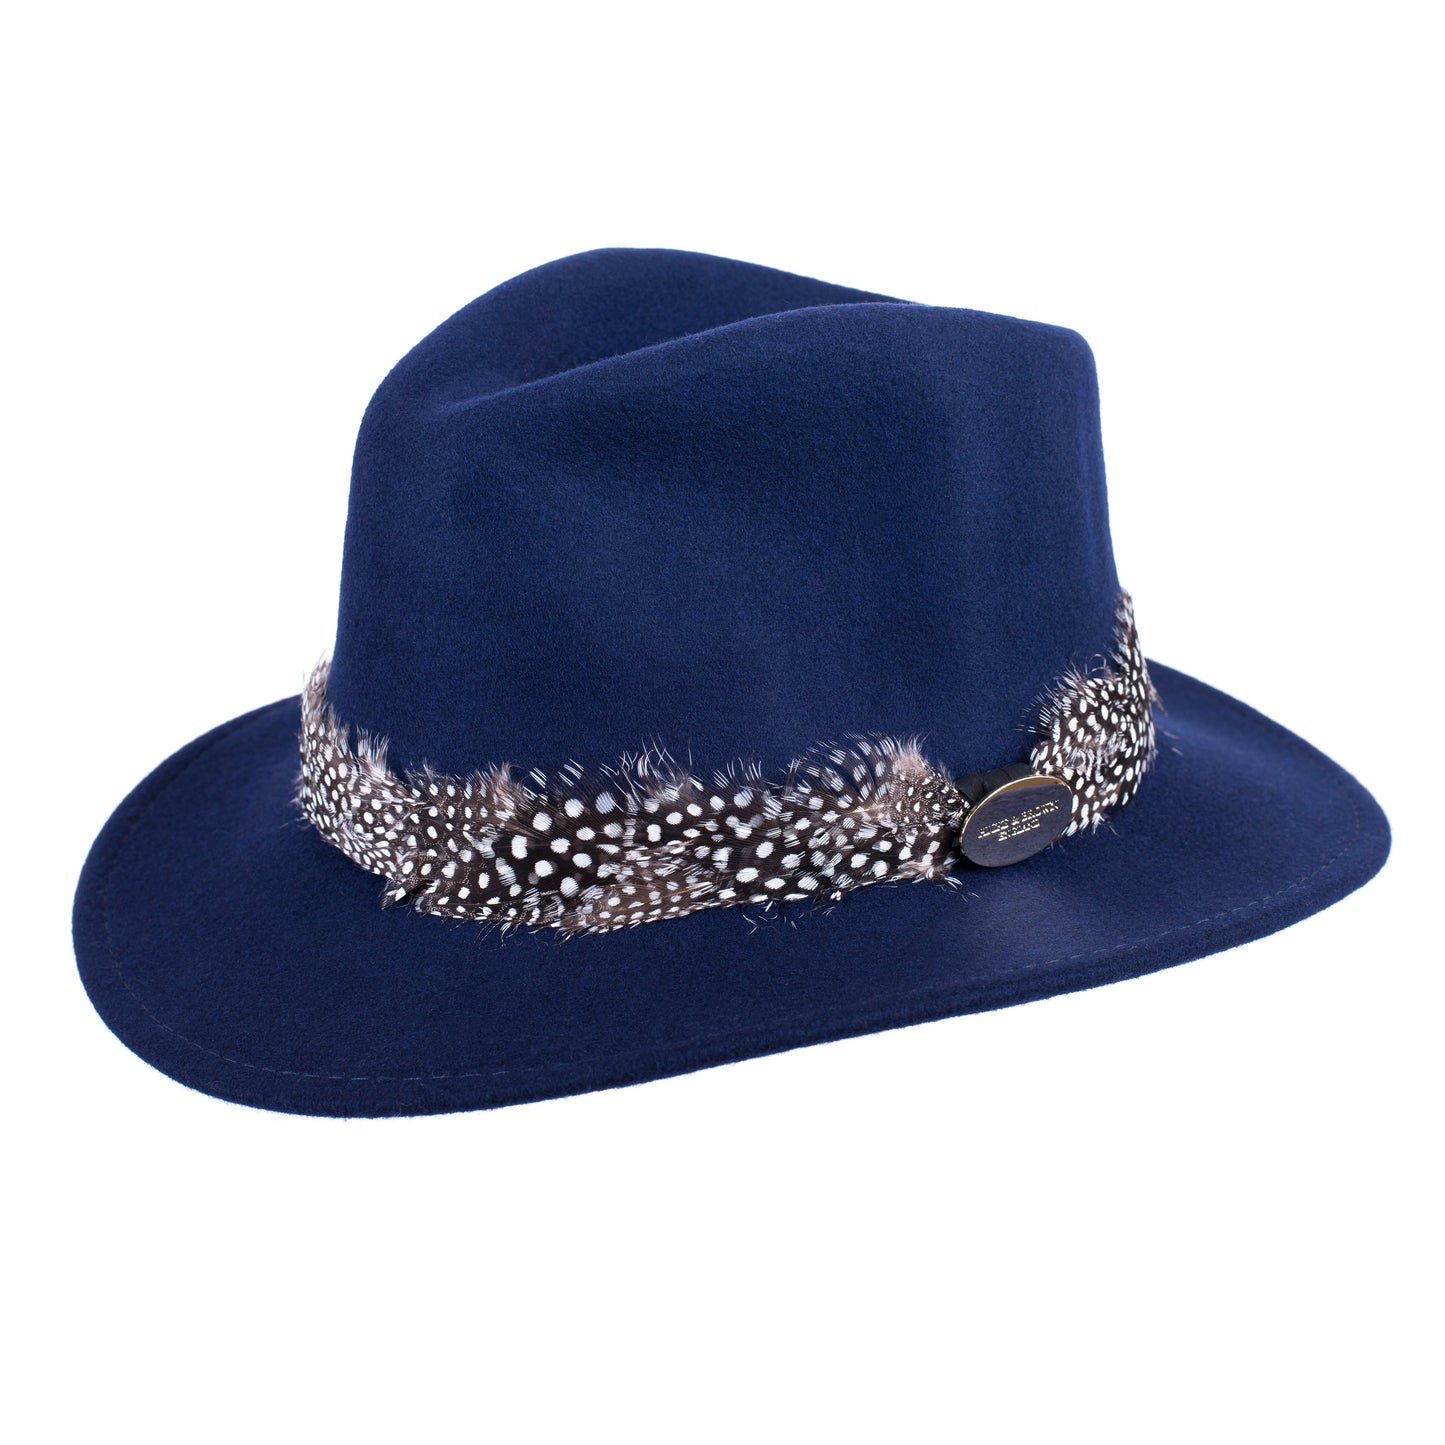 Hicks & Brown Fedora The Suffolk Fedora in Navy (Guinea Feather Wrap)